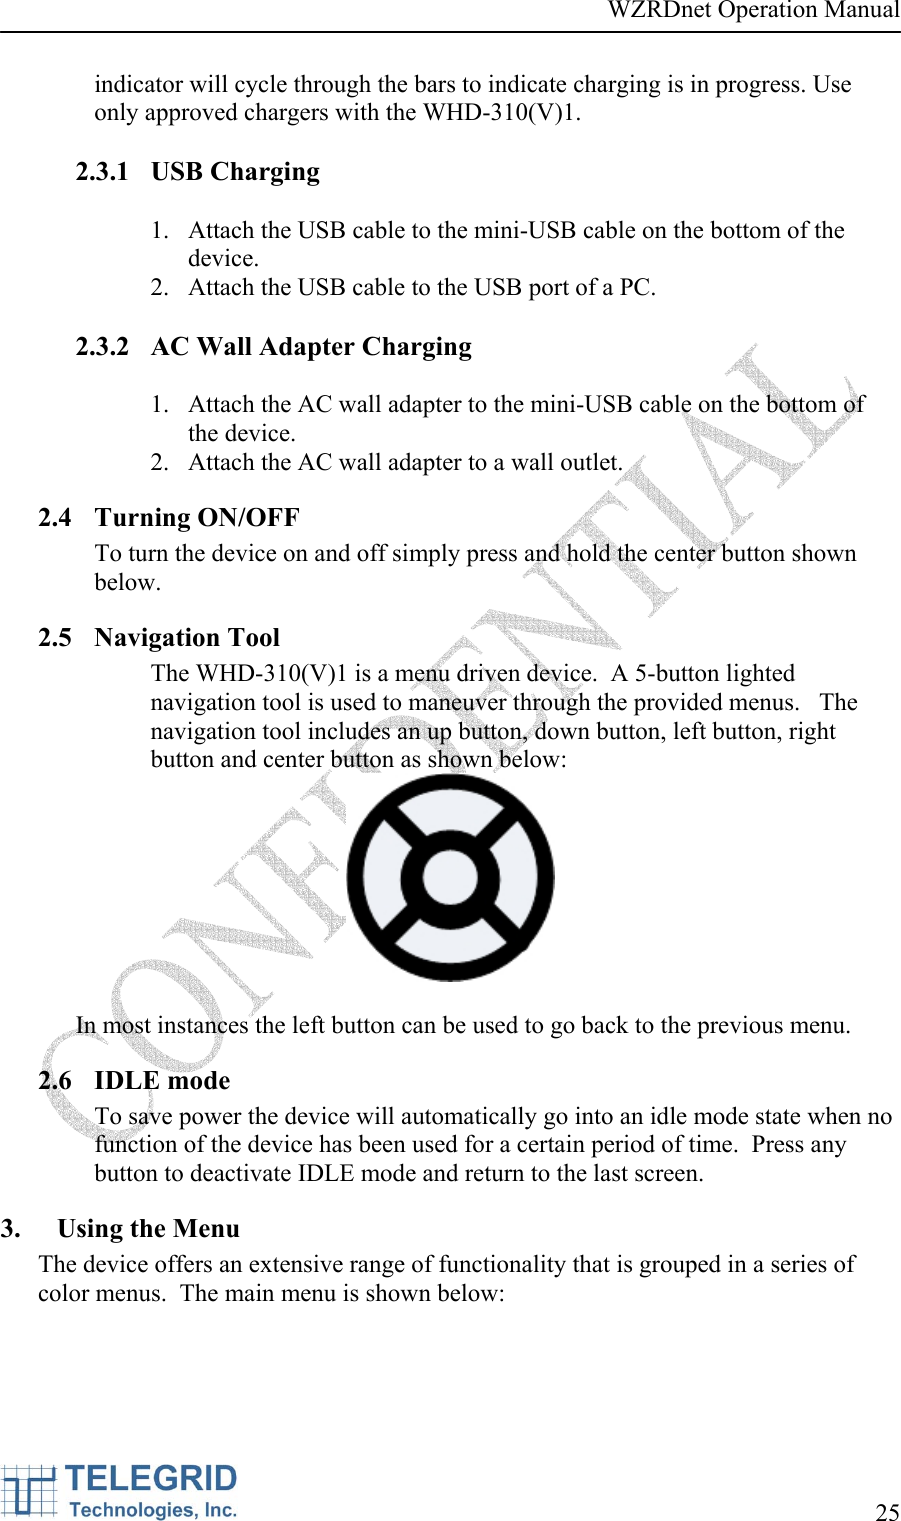 WZRDnet Operation Manual     25   indicator will cycle through the bars to indicate charging is in progress. Use only approved chargers with the WHD-310(V)1.  2.3.1 USB Charging  1. Attach the USB cable to the mini-USB cable on the bottom of the device. 2. Attach the USB cable to the USB port of a PC.  2.3.2 AC Wall Adapter Charging  1. Attach the AC wall adapter to the mini-USB cable on the bottom of the device. 2. Attach the AC wall adapter to a wall outlet. 2.4 Turning ON/OFF To turn the device on and off simply press and hold the center button shown below. 2.5 Navigation Tool The WHD-310(V)1 is a menu driven device.  A 5-button lighted navigation tool is used to maneuver through the provided menus.   The navigation tool includes an up button, down button, left button, right button and center button as shown below:   In most instances the left button can be used to go back to the previous menu. 2.6 IDLE mode To save power the device will automatically go into an idle mode state when no function of the device has been used for a certain period of time.  Press any button to deactivate IDLE mode and return to the last screen.   3. Using the Menu The device offers an extensive range of functionality that is grouped in a series of color menus.  The main menu is shown below:  